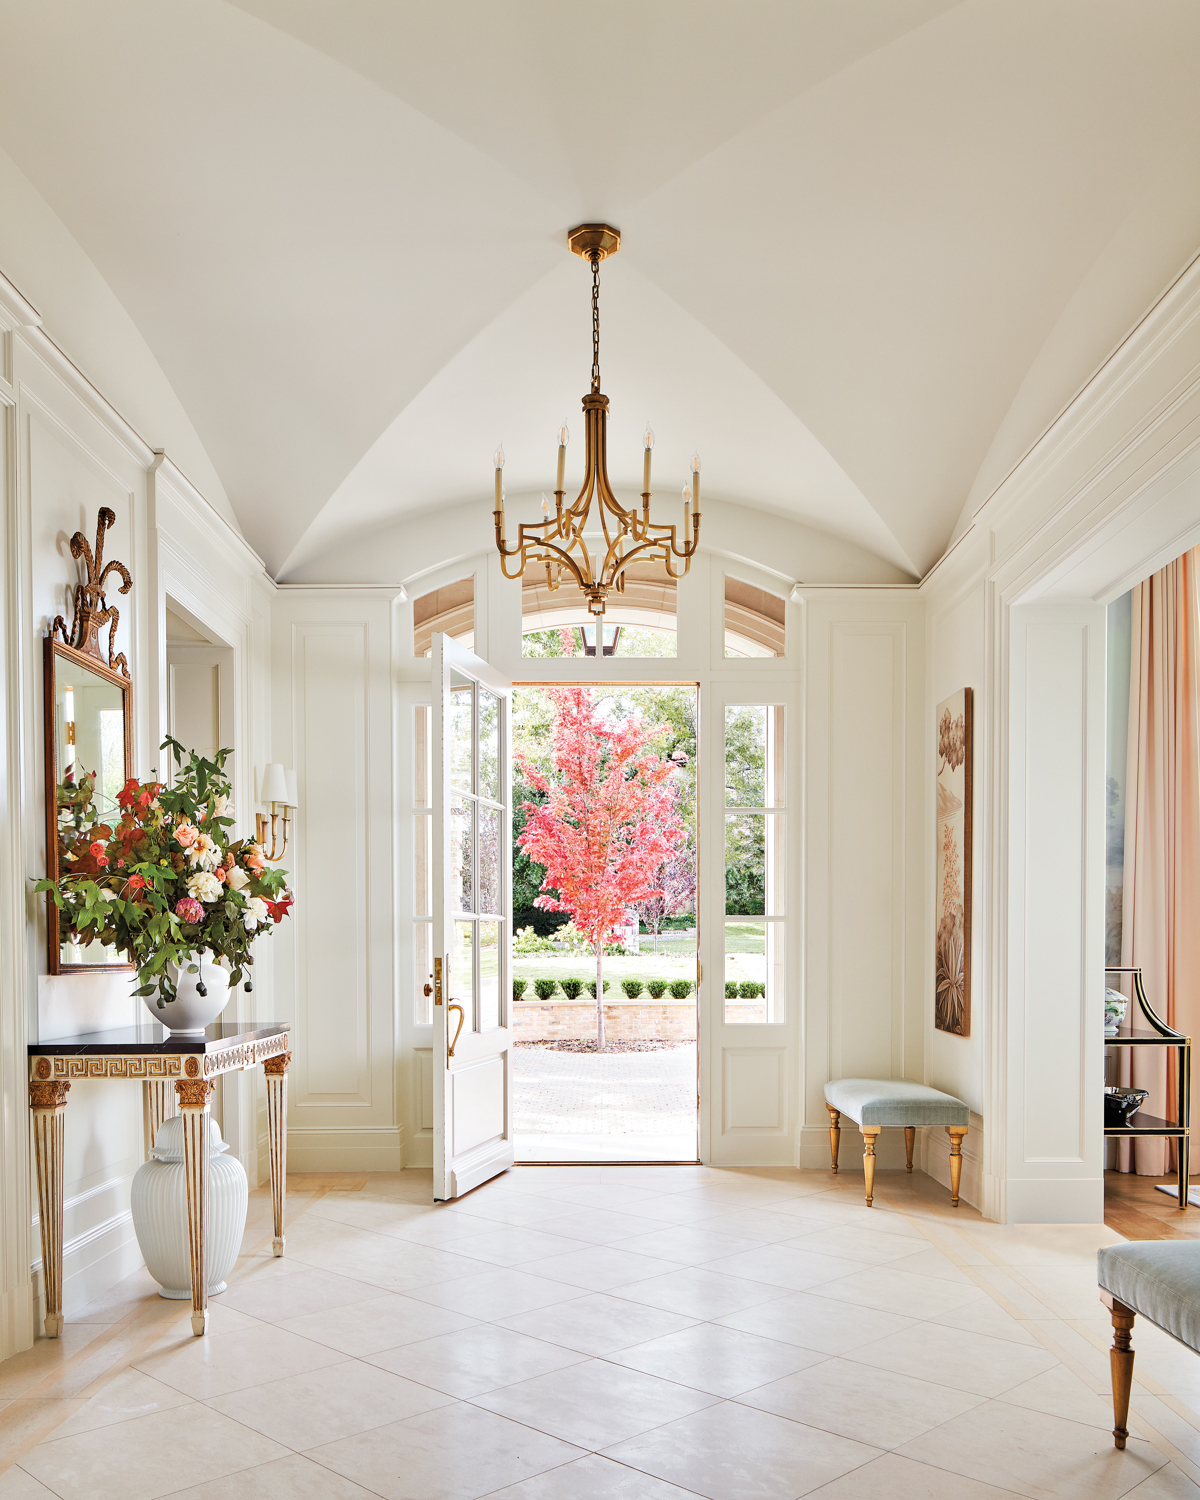 Entryway with a curved vaulted ceiling